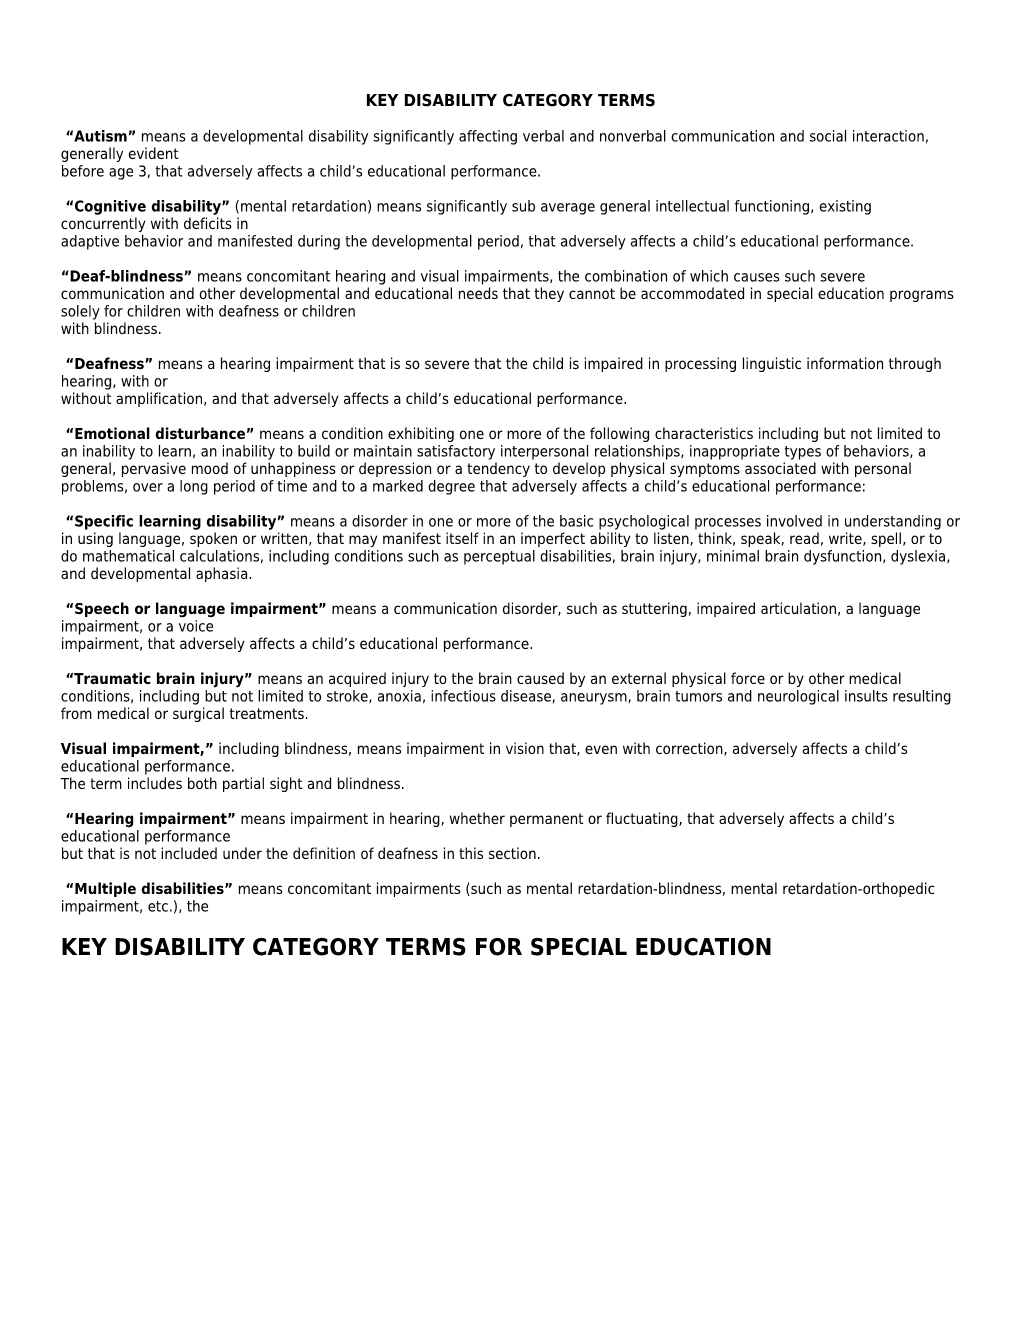 Key Disability Category Terms